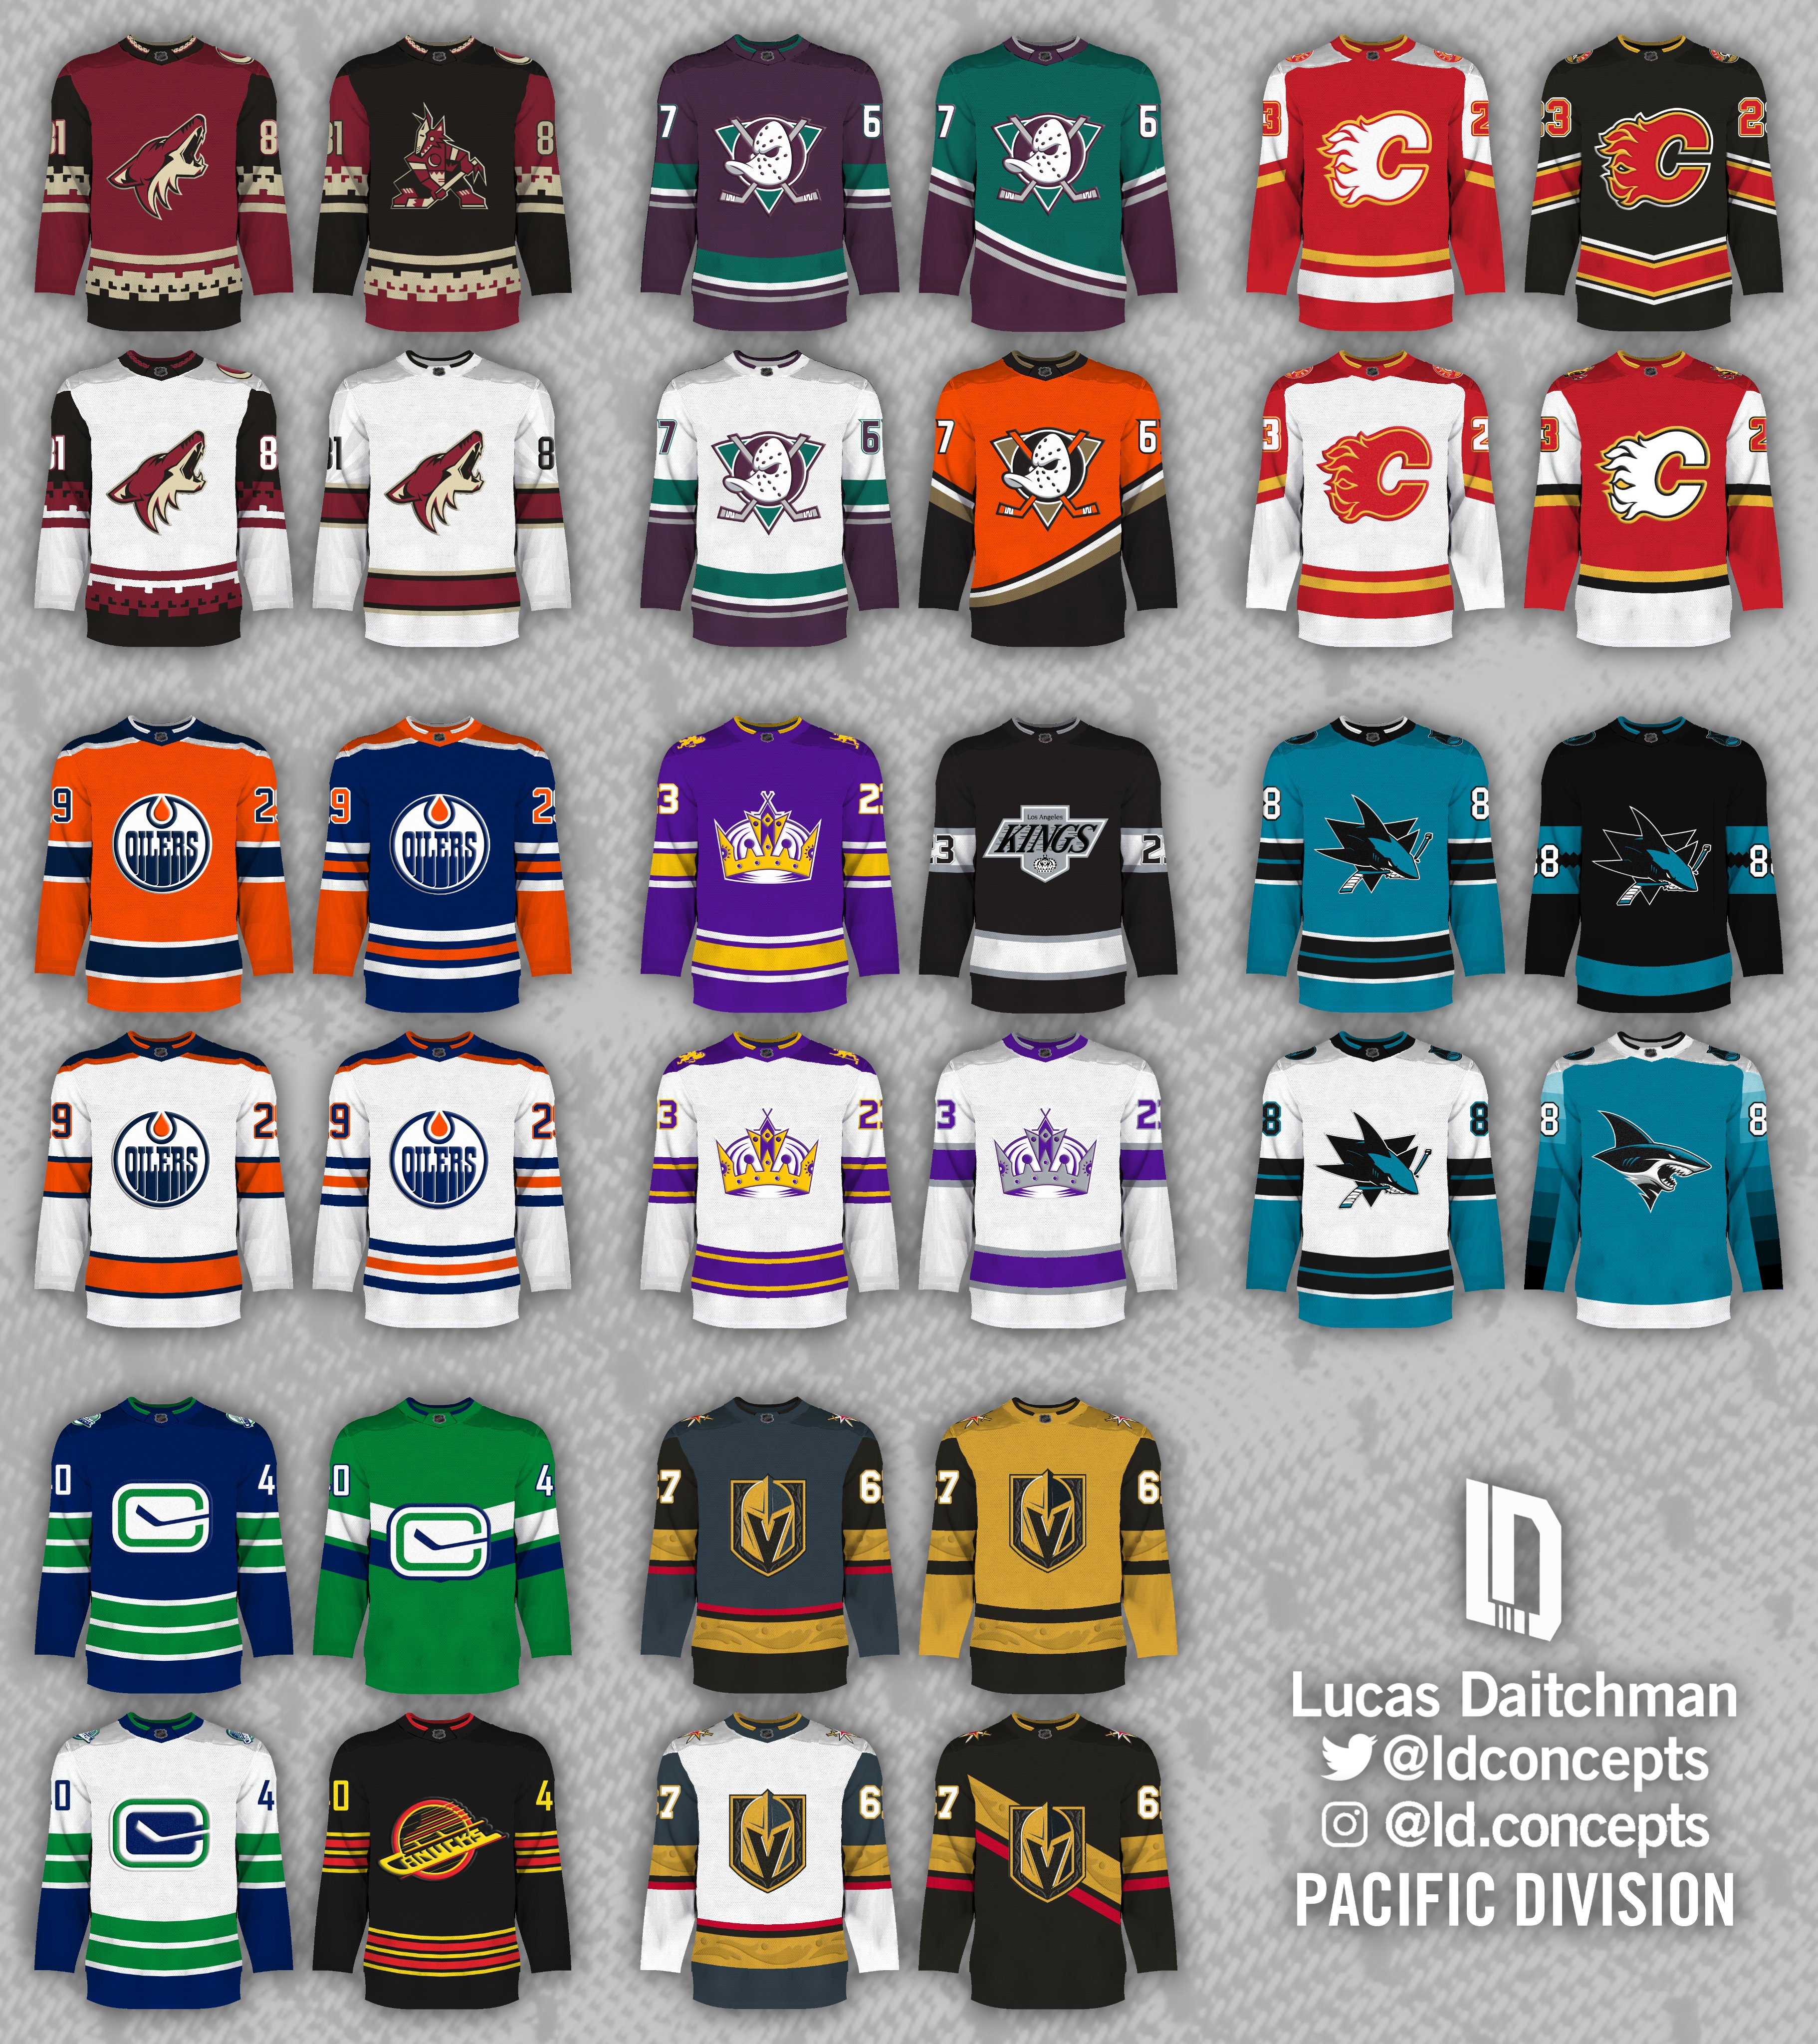 Which NHL team has the nicest jersey concept foursome of this